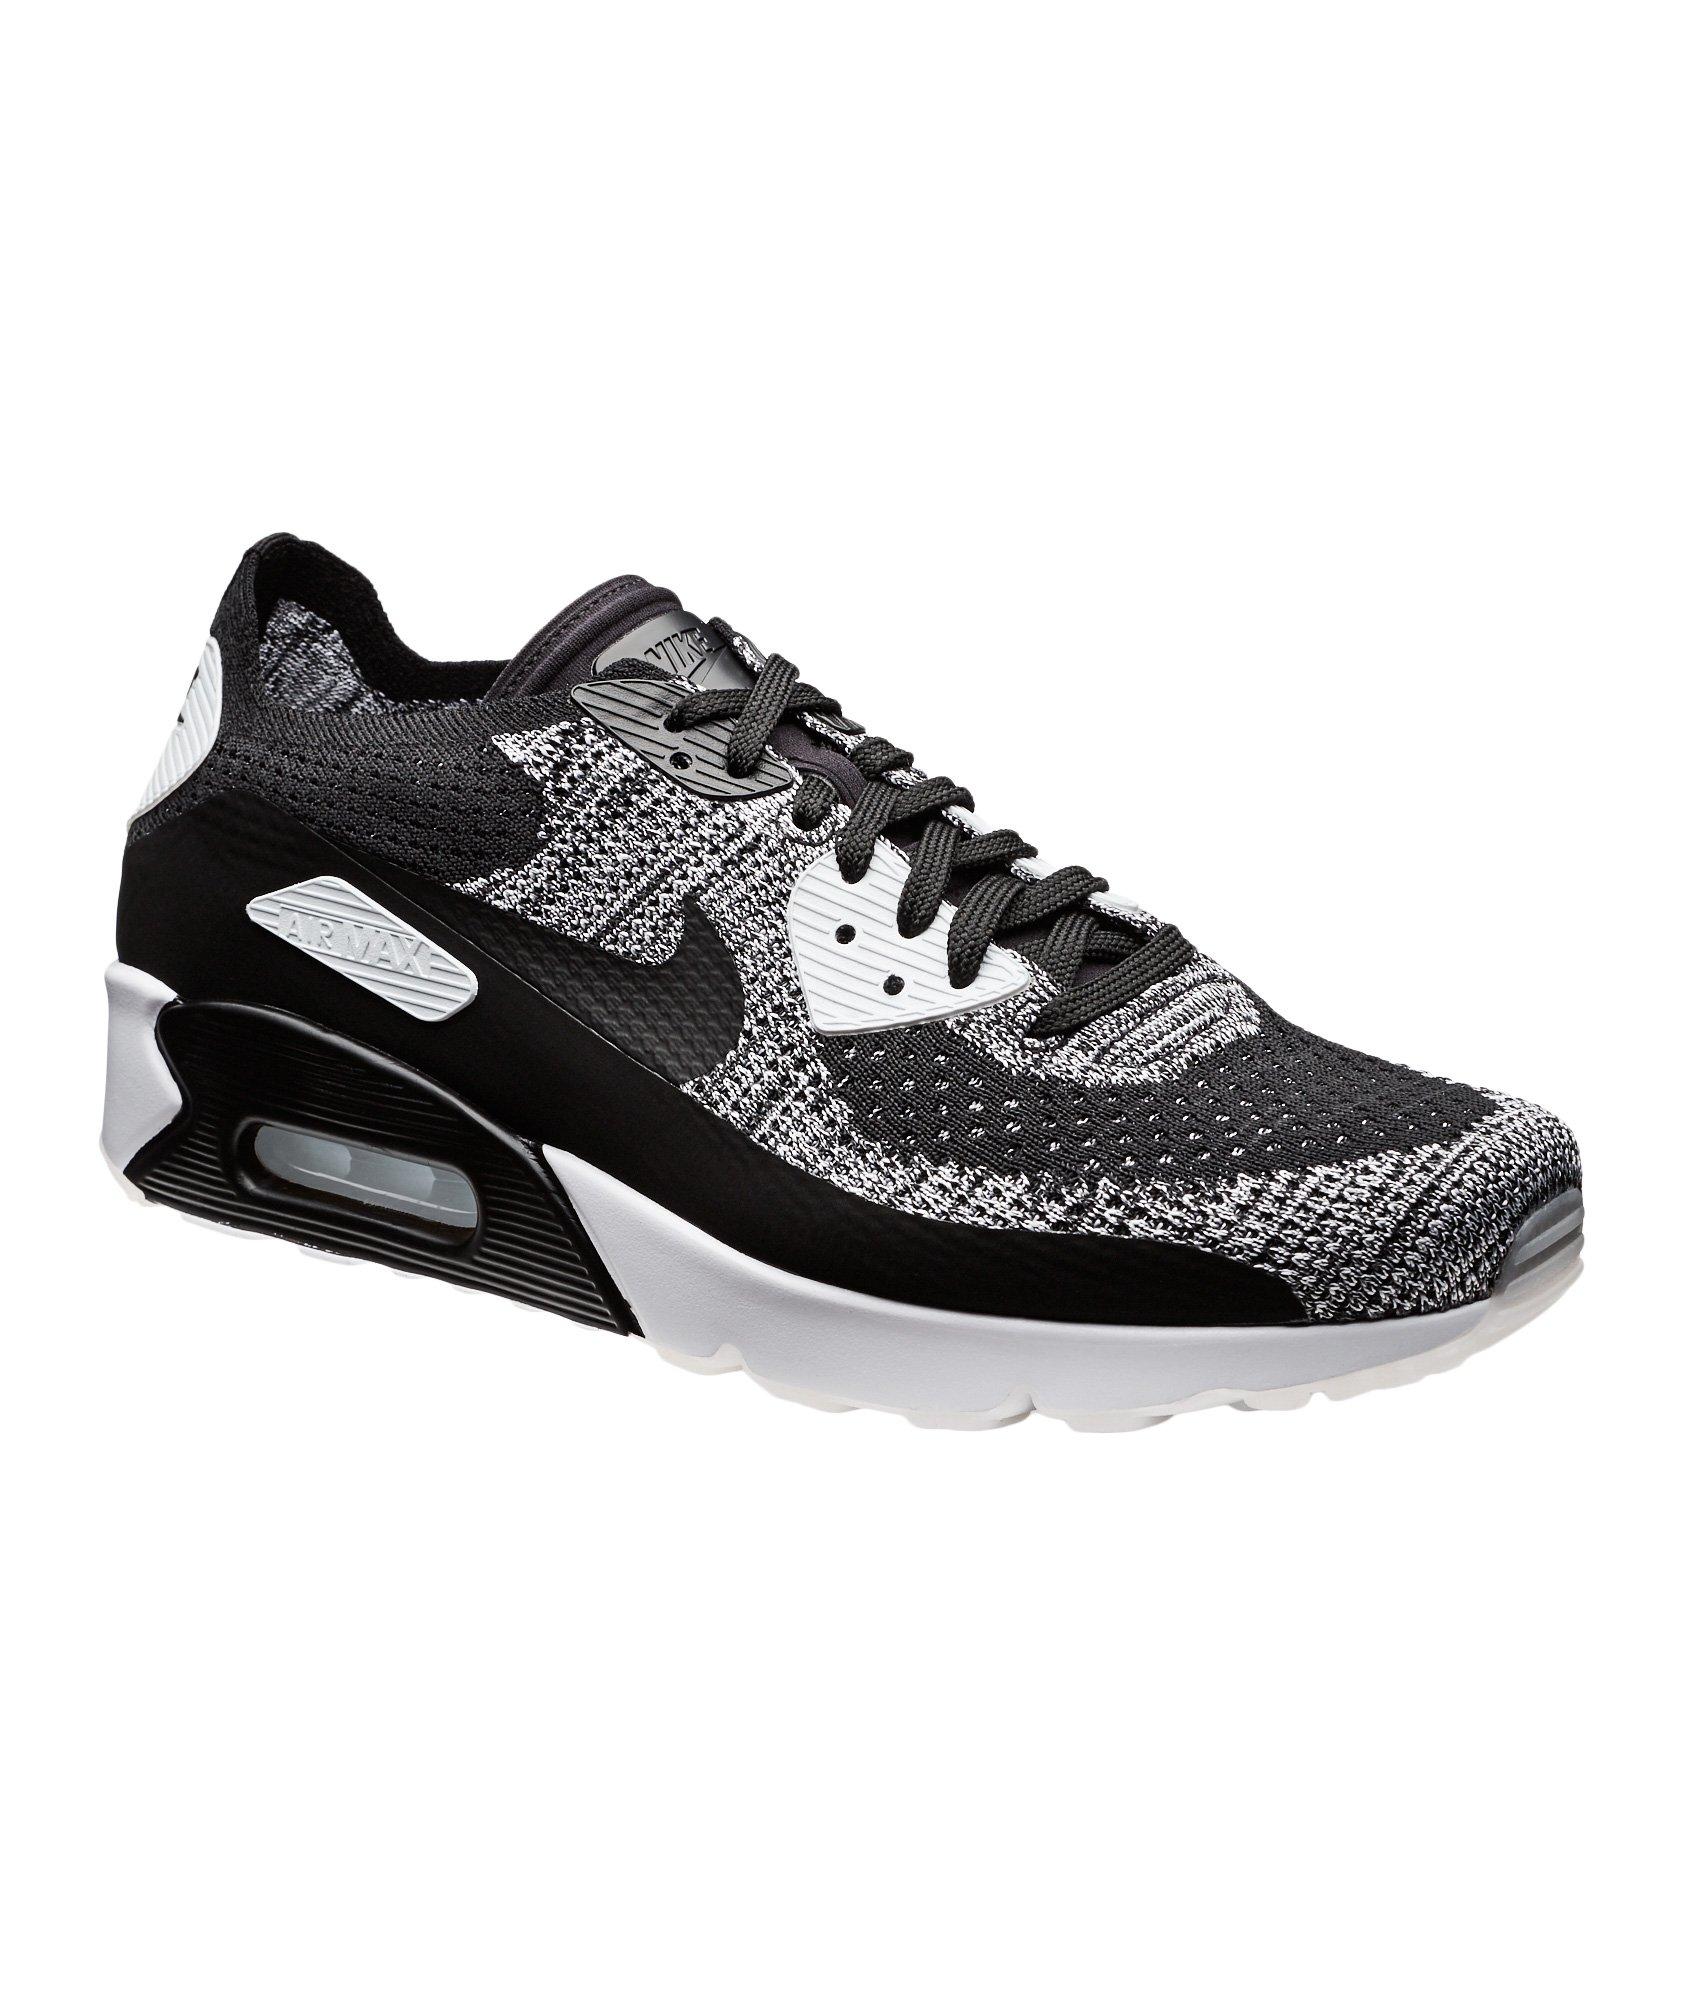 Air Max 90 Ultra 2.0 Flyknit Sneakers image 0